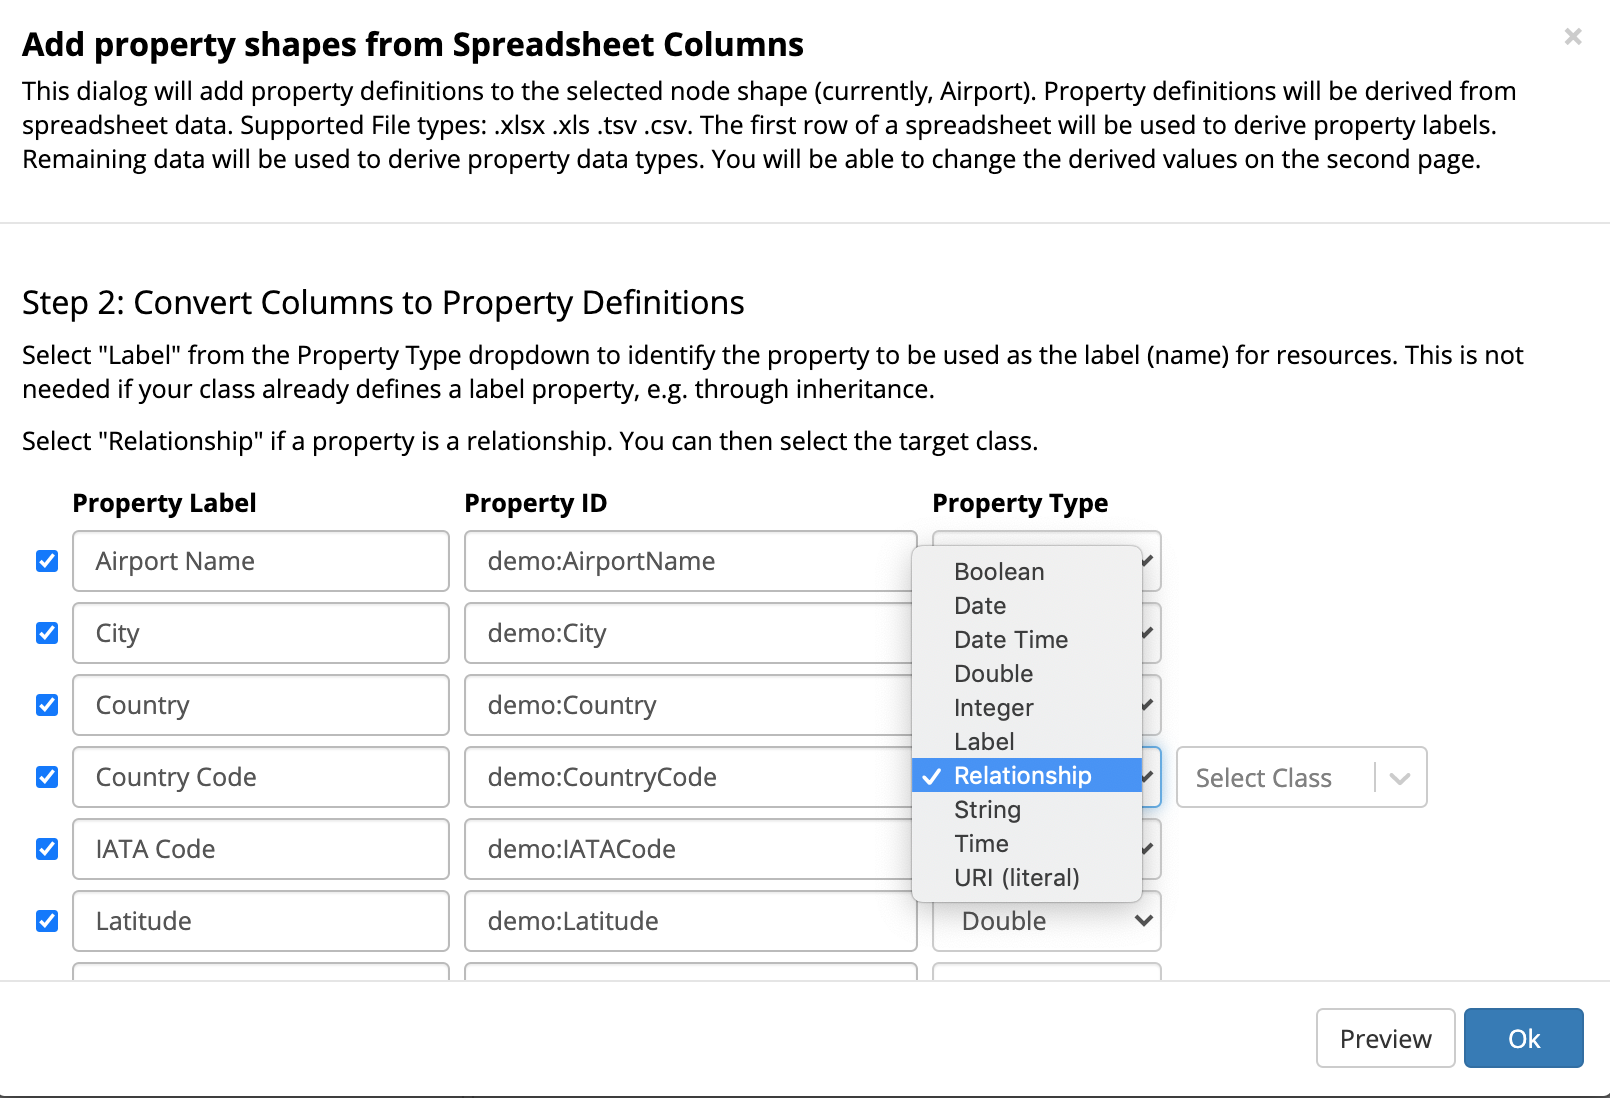 TopBraid EDG Adding Property Shapes from Spreadsheet Columns Example